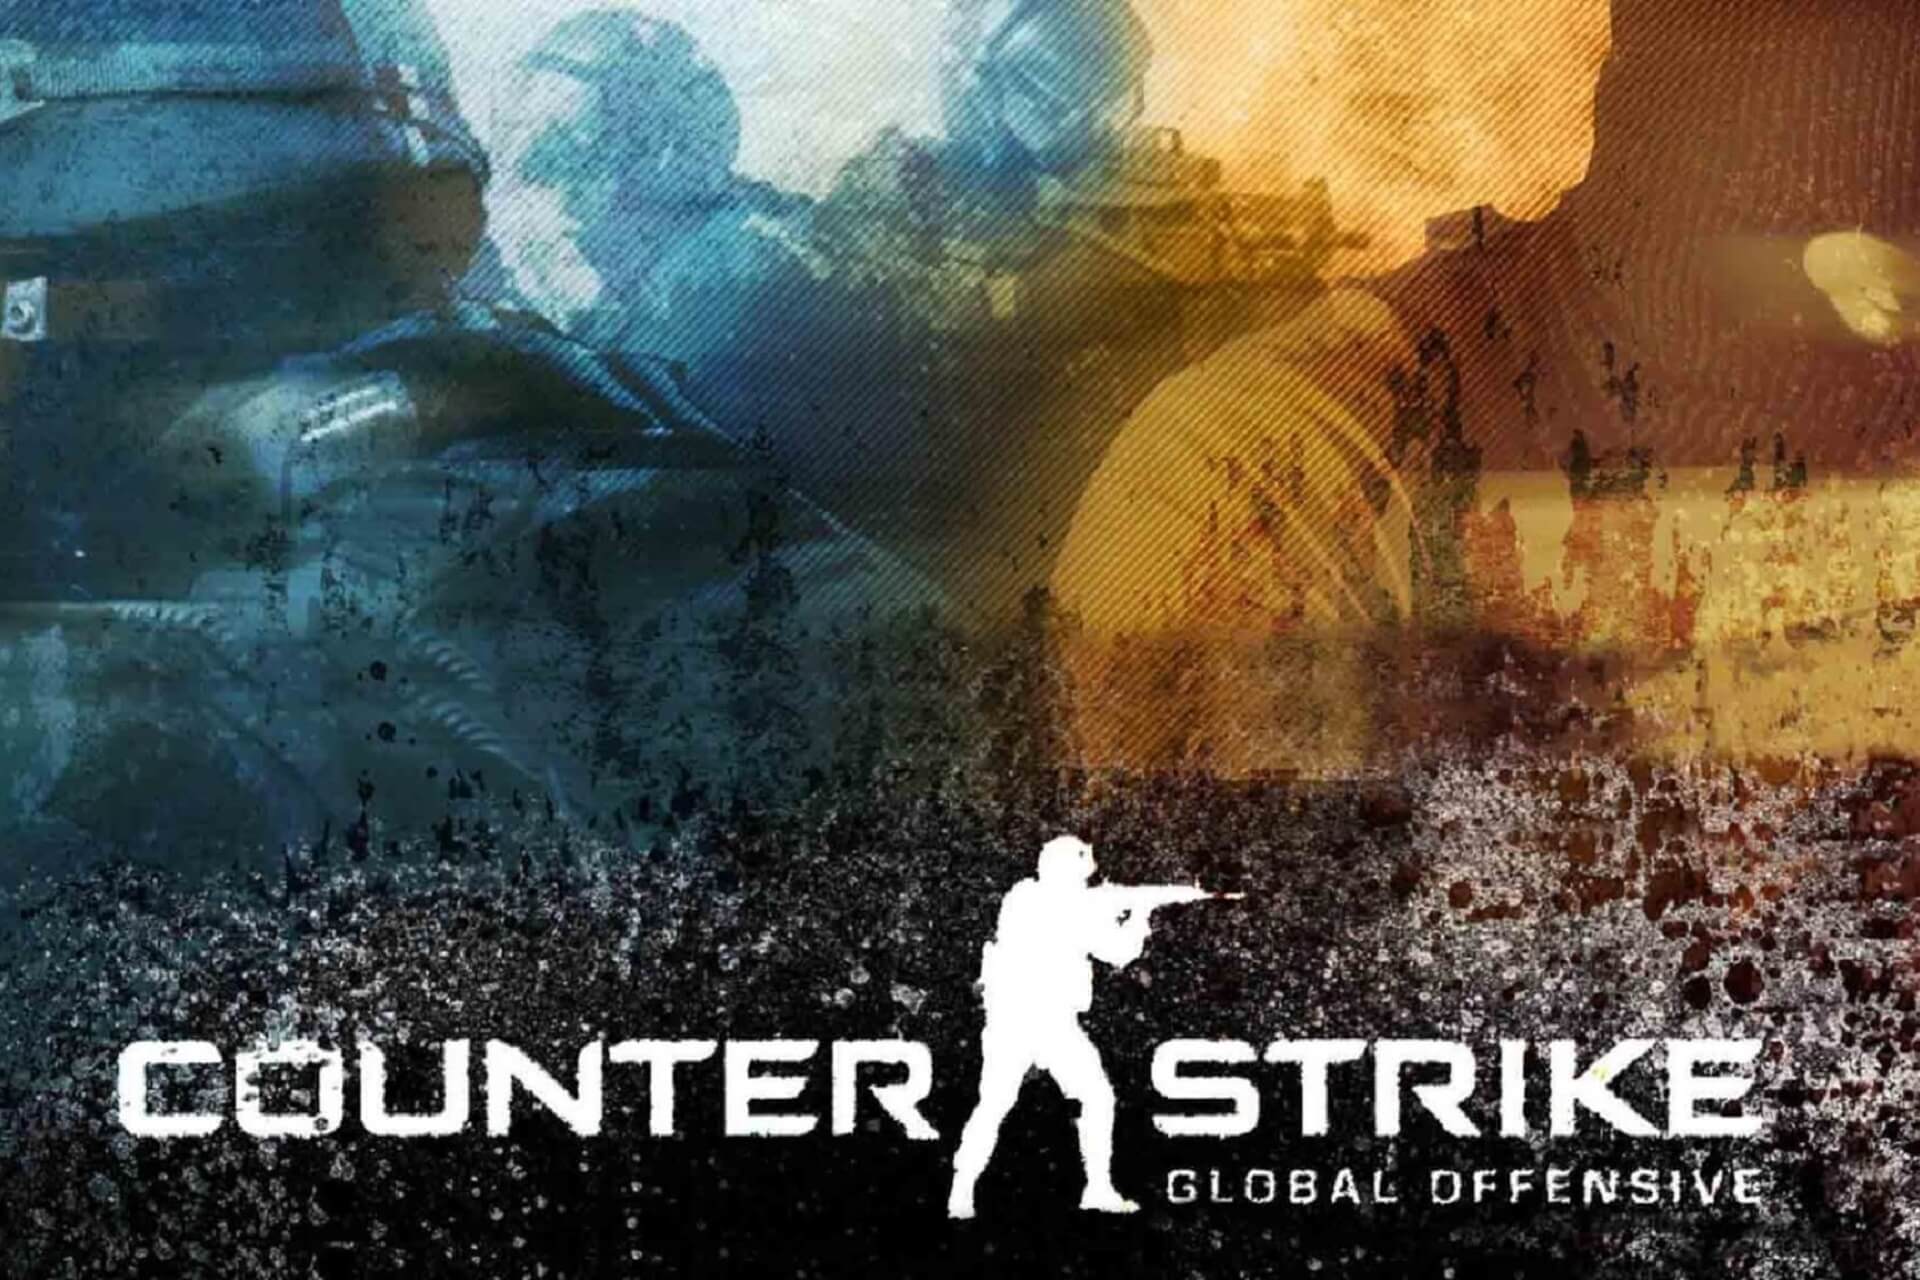 How to connecting to cs go matchmaking servers 2022